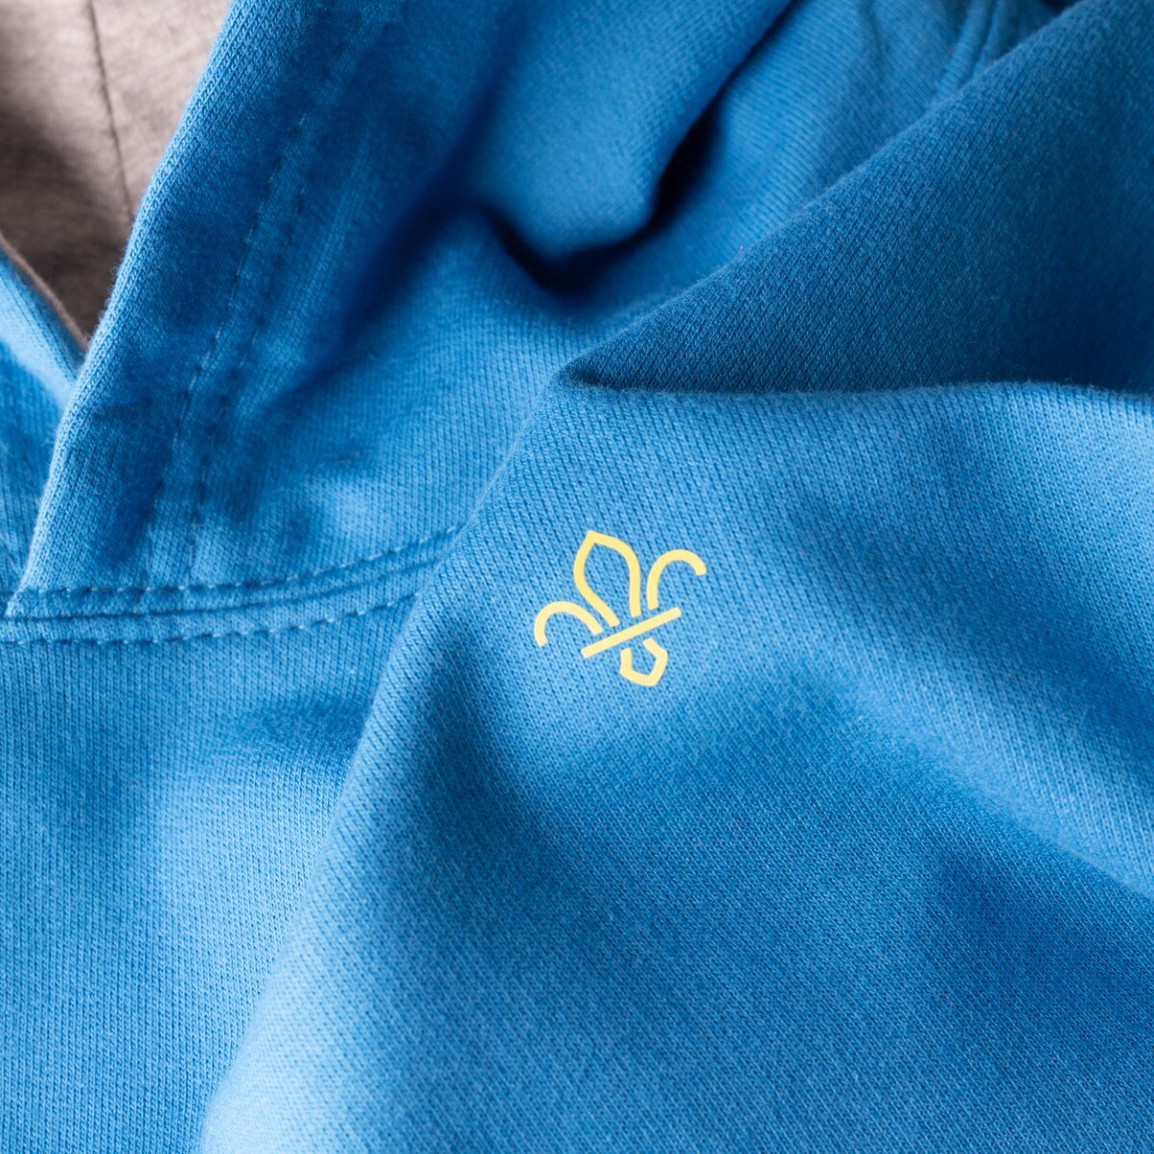 Beaver Scouts Hoodie for Kids | Beavers Clothing New in